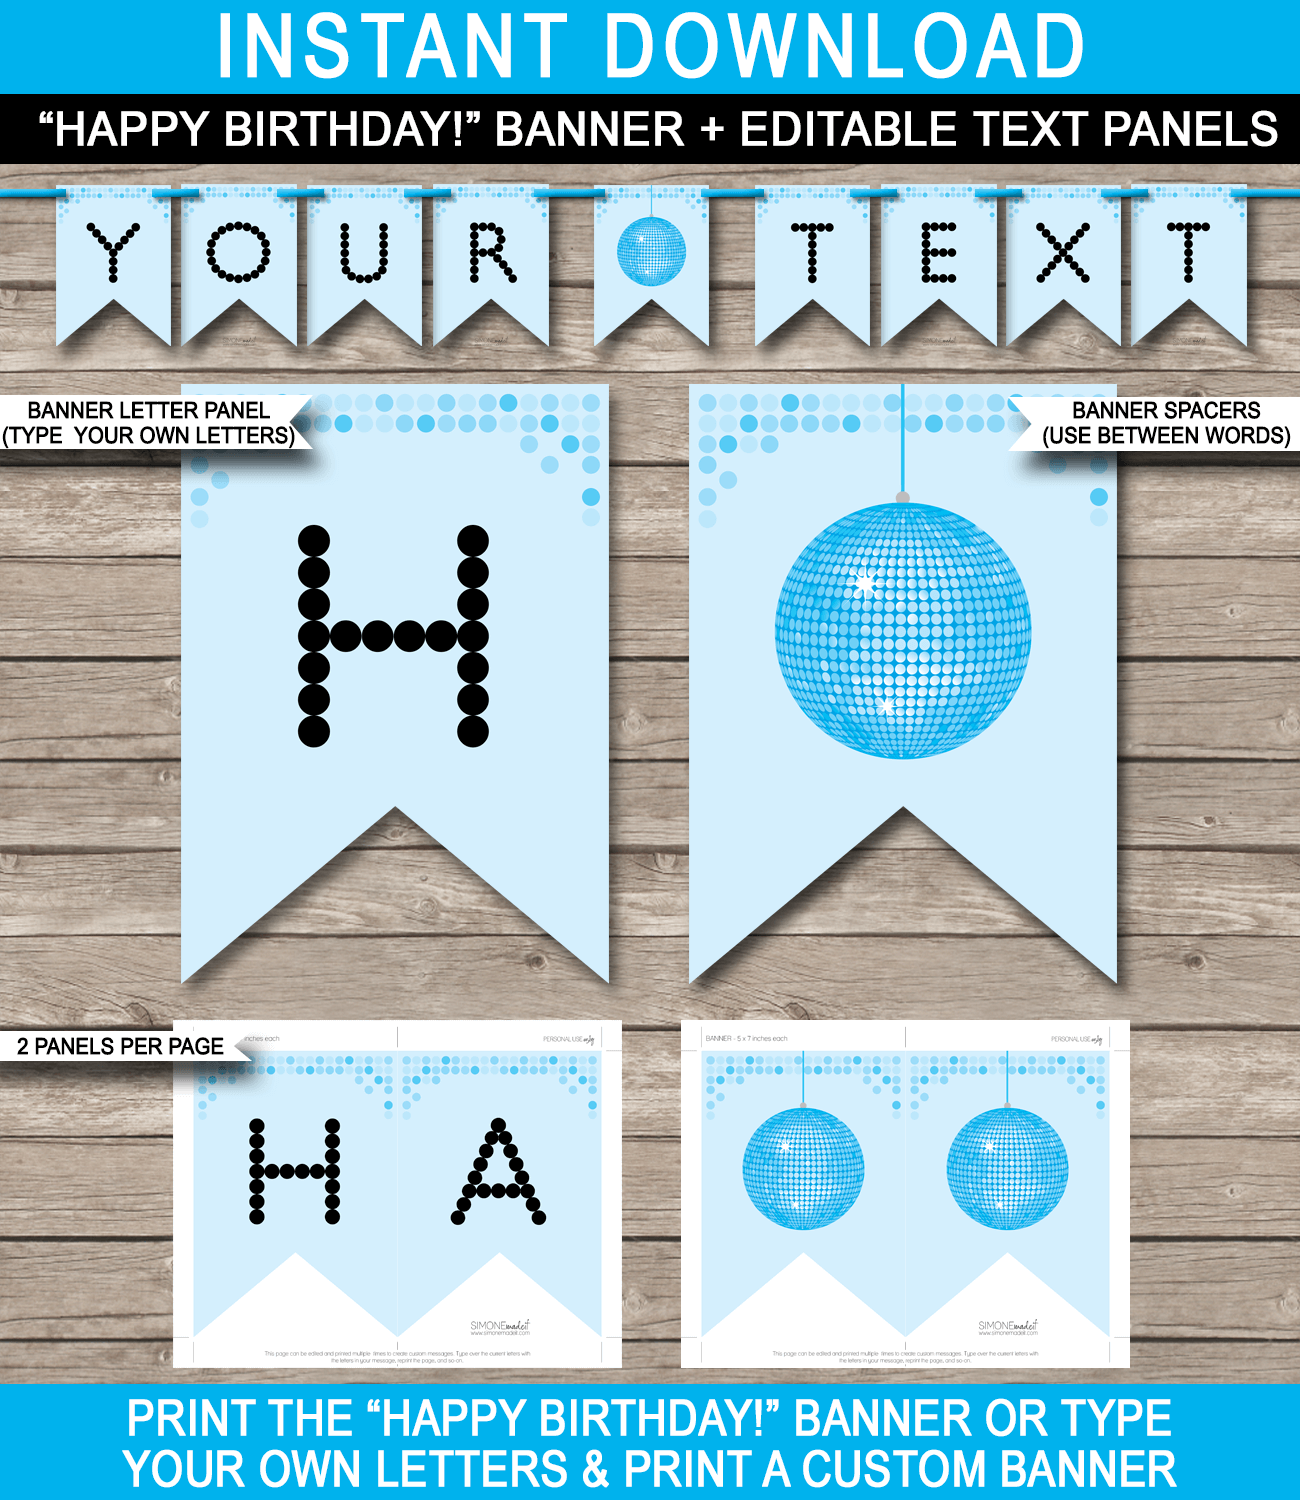 Blue Dance Banner Template - Disco Bunting - Disco Banner - Happy Birthday Banner - Birthday Party - Editable and Printable DIY Template - INSTANT DOWNLOAD $4.50 via simonemadeit.com